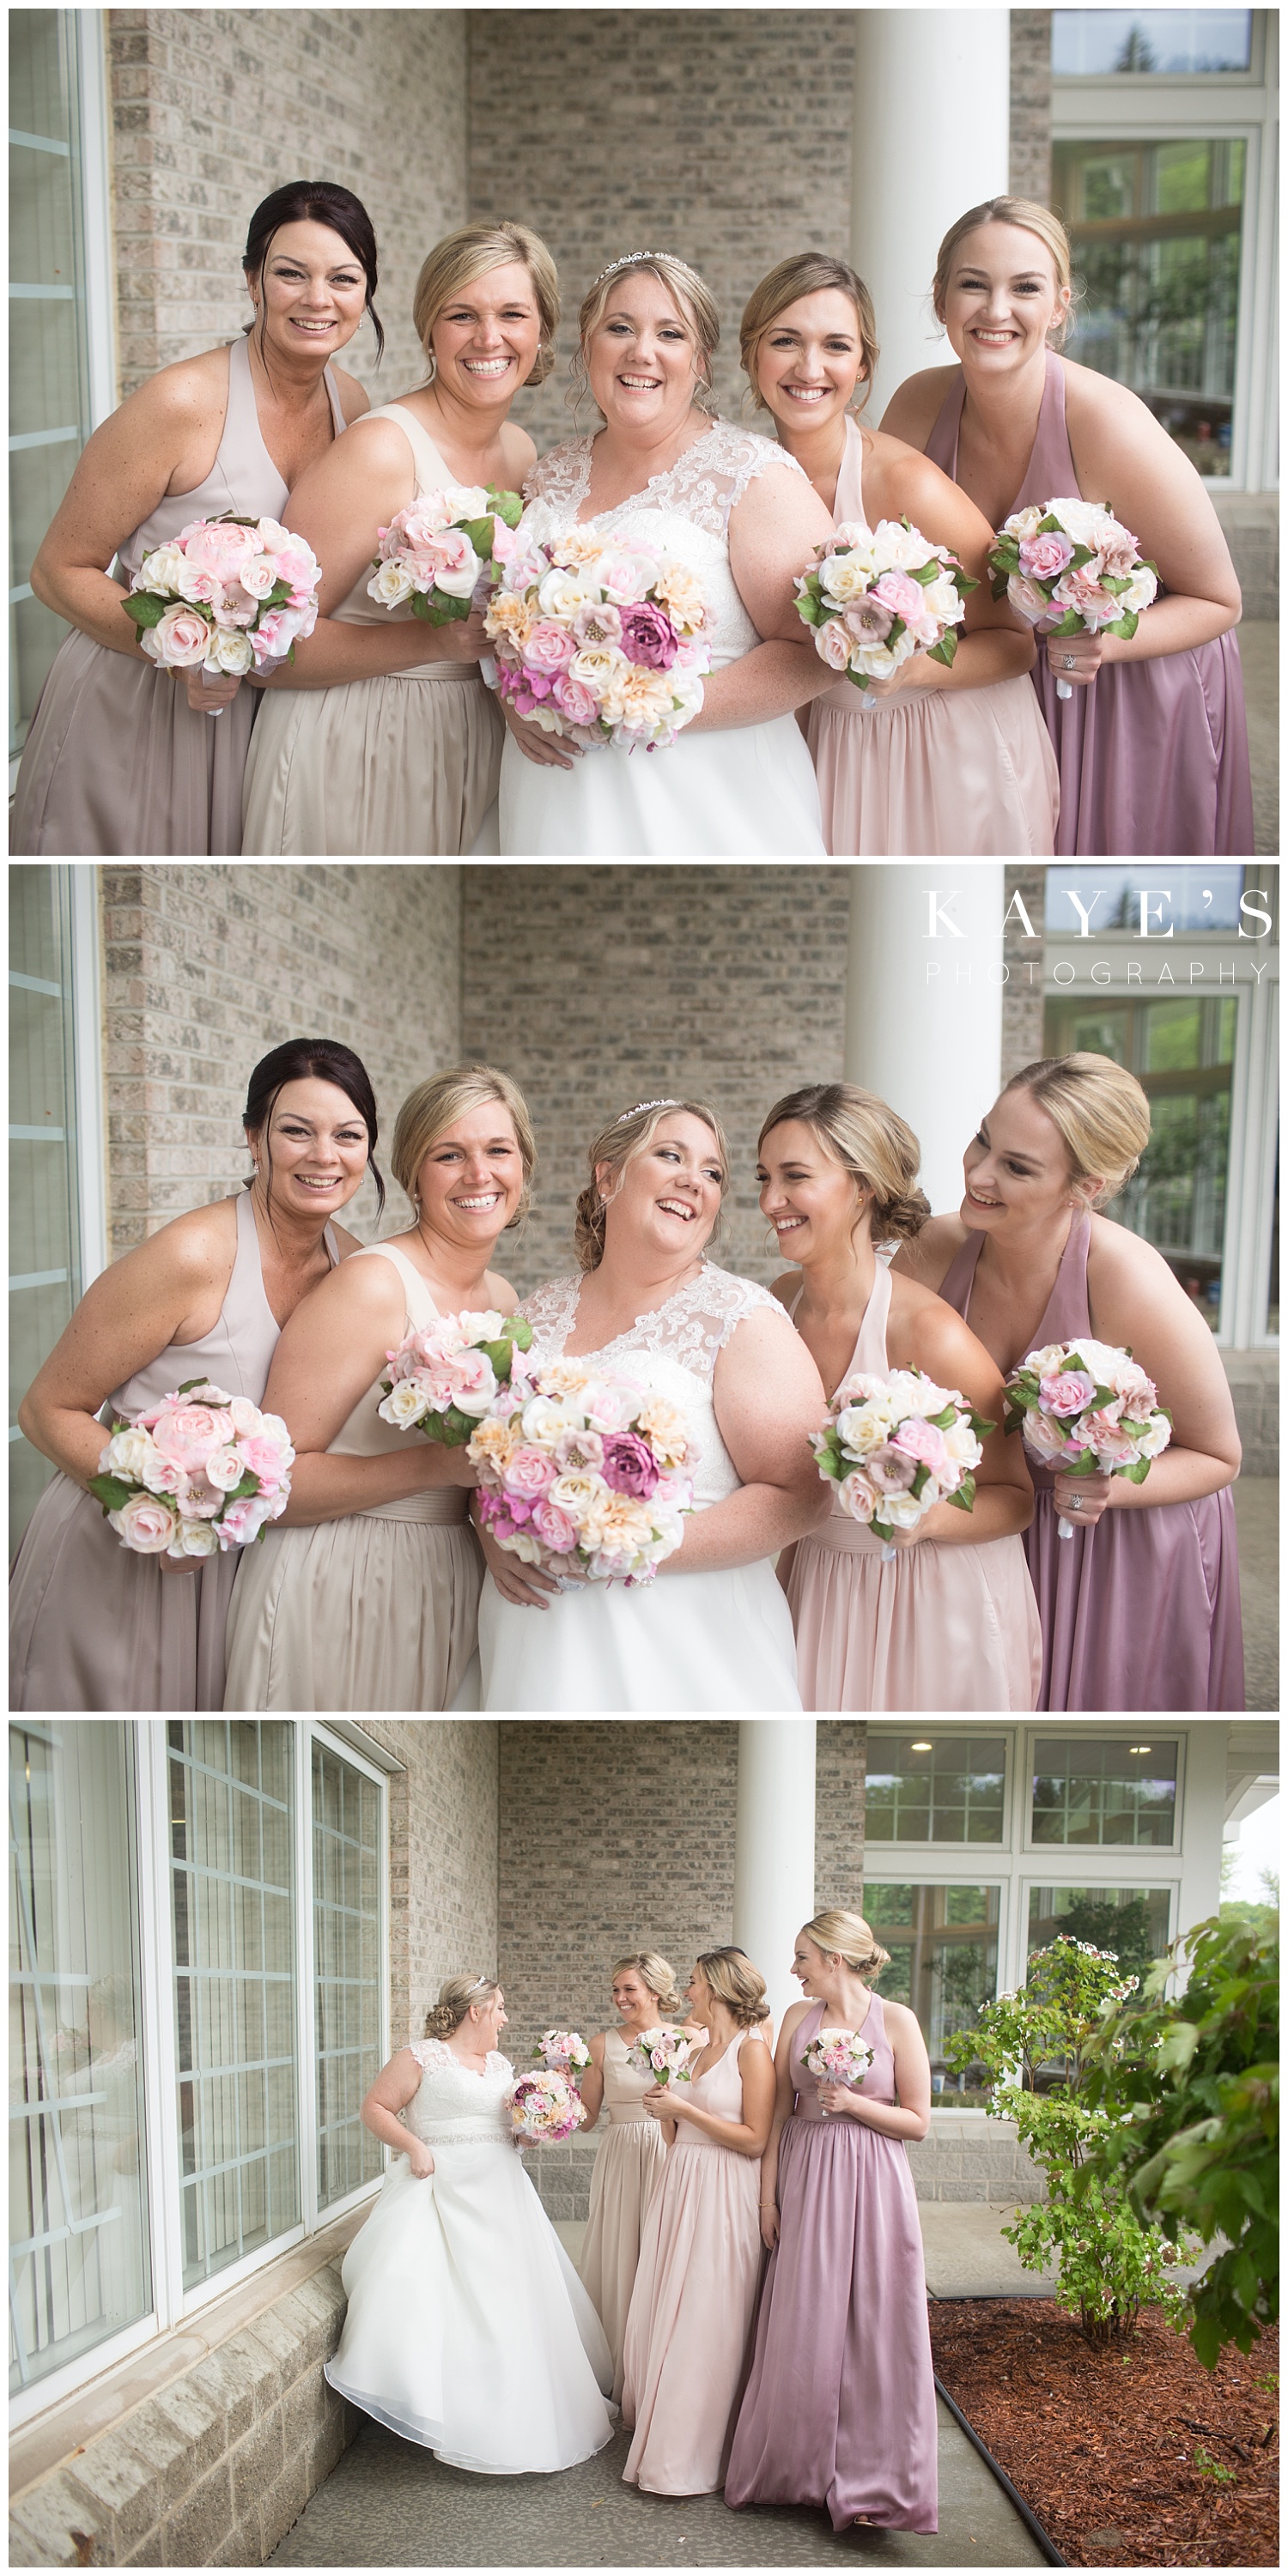 bride and bridesmaids in neutral bridesmaids dresses before the wedding ceremony